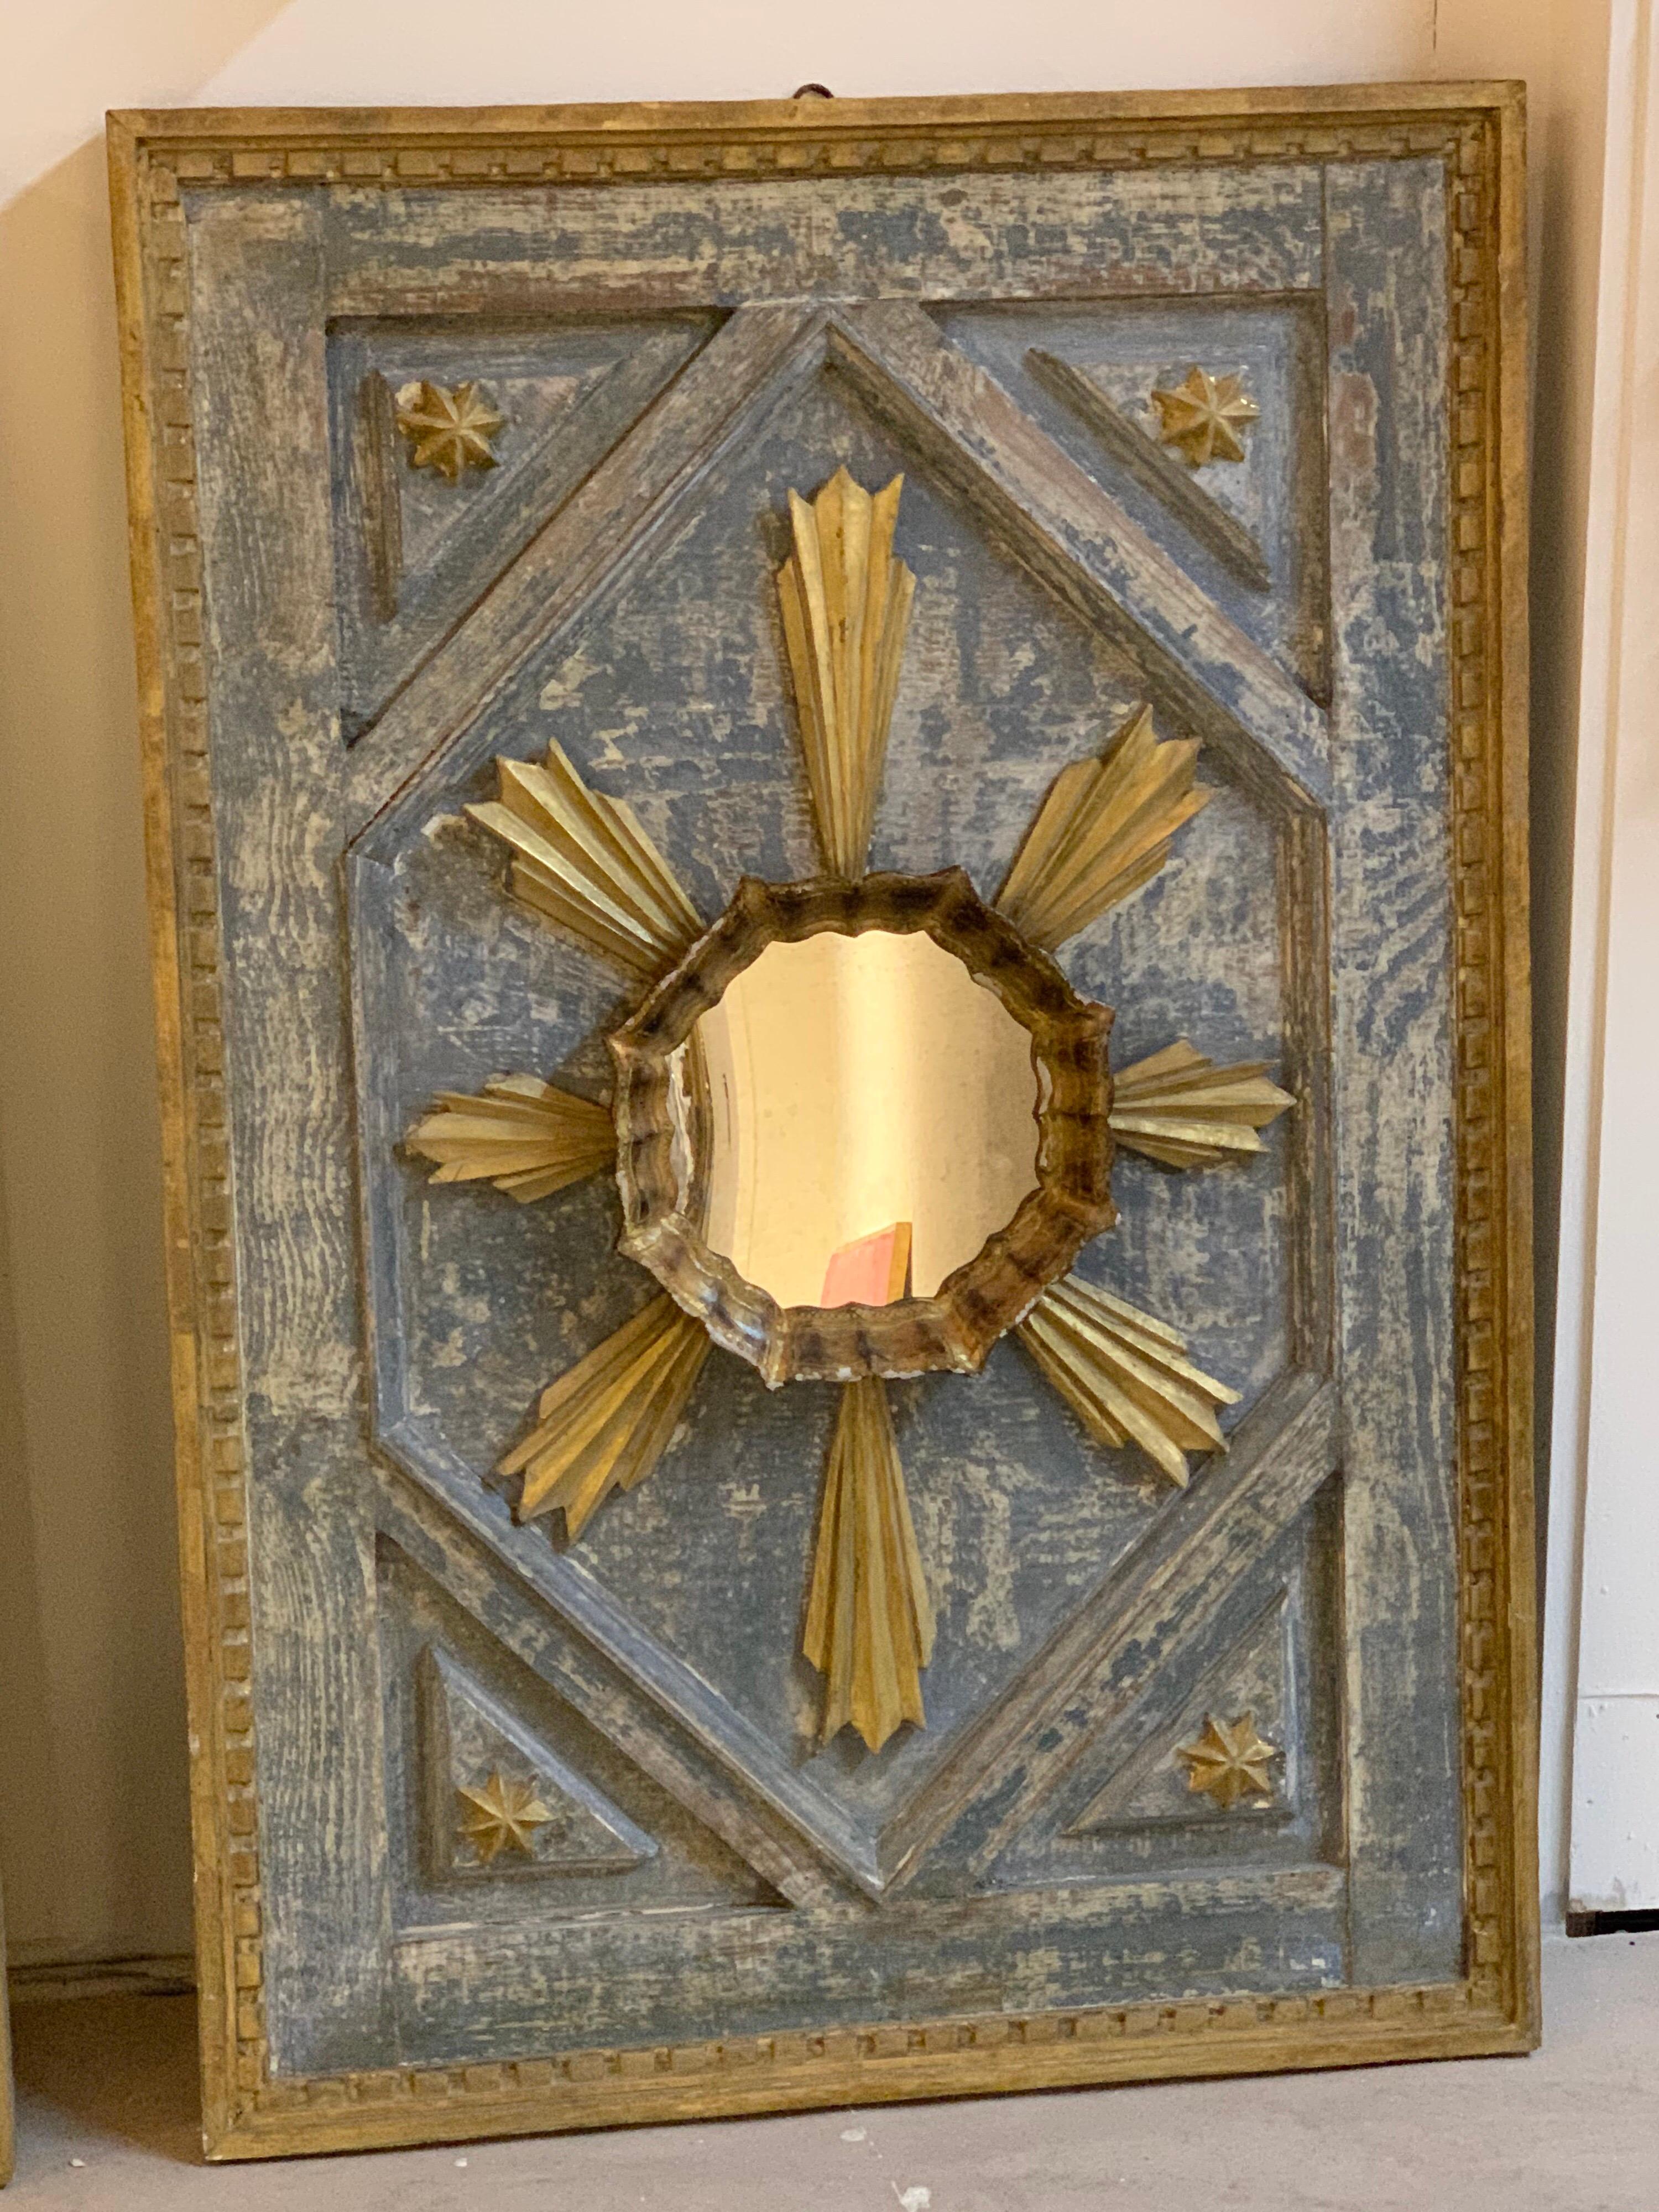 Decorative pair of Italian carved and parcel gilt panels with starburst pattern and mirrors in the center. Very fine patina on these. A beautiful pieces of art!